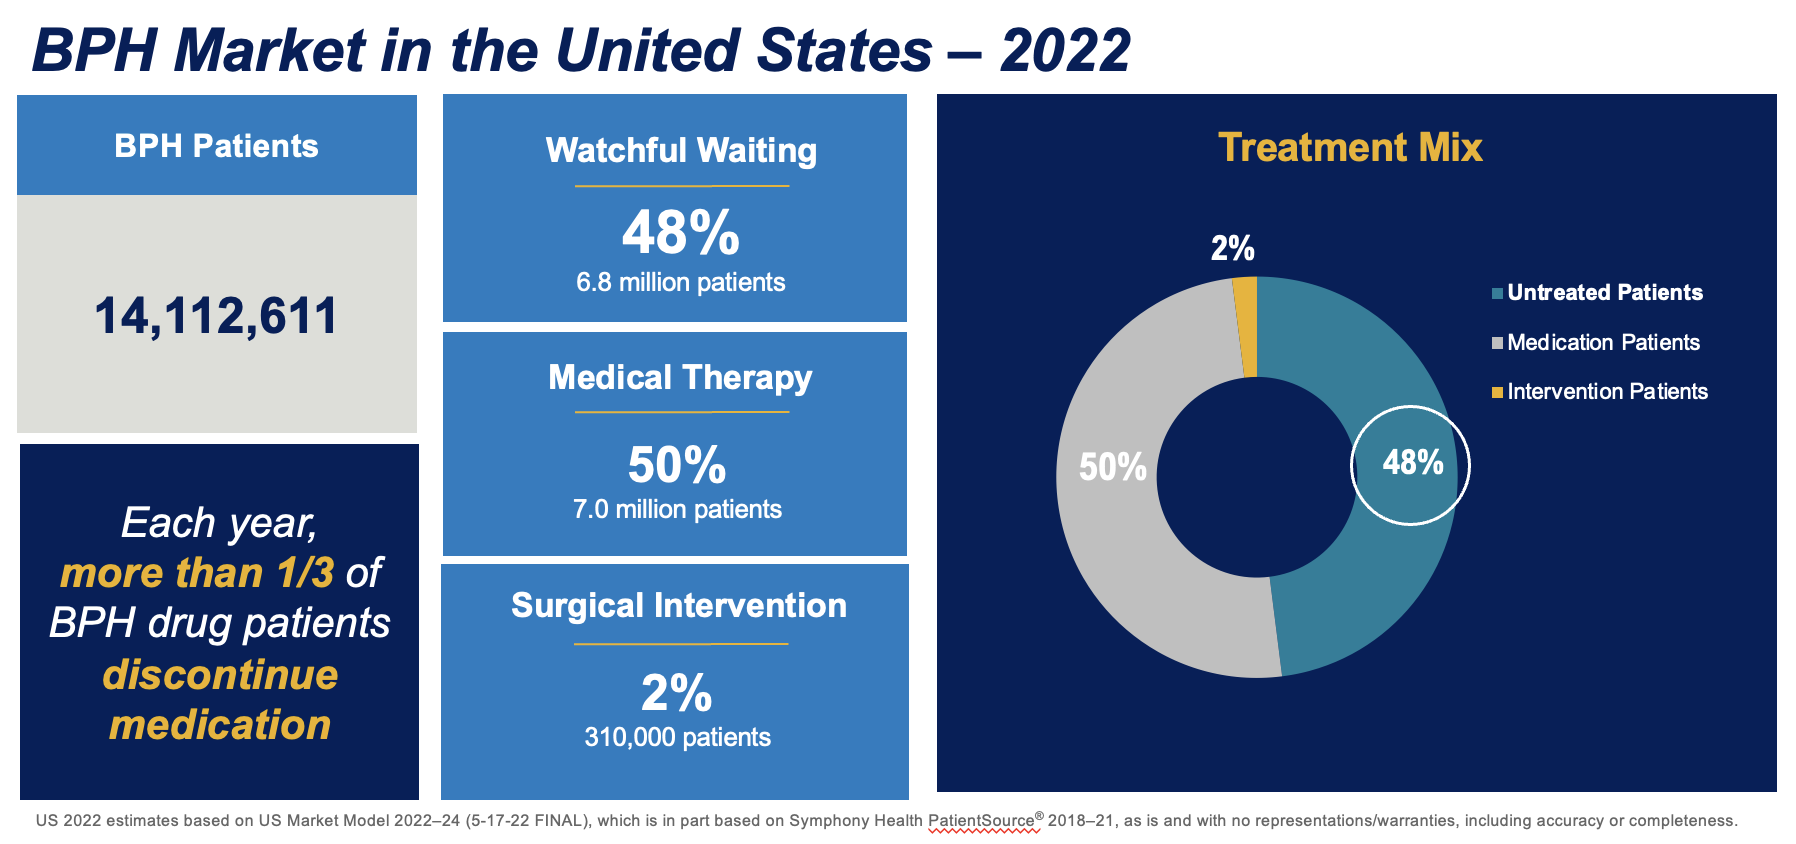 Graphic showing statistics for the BPH Market in the United States in 2022.